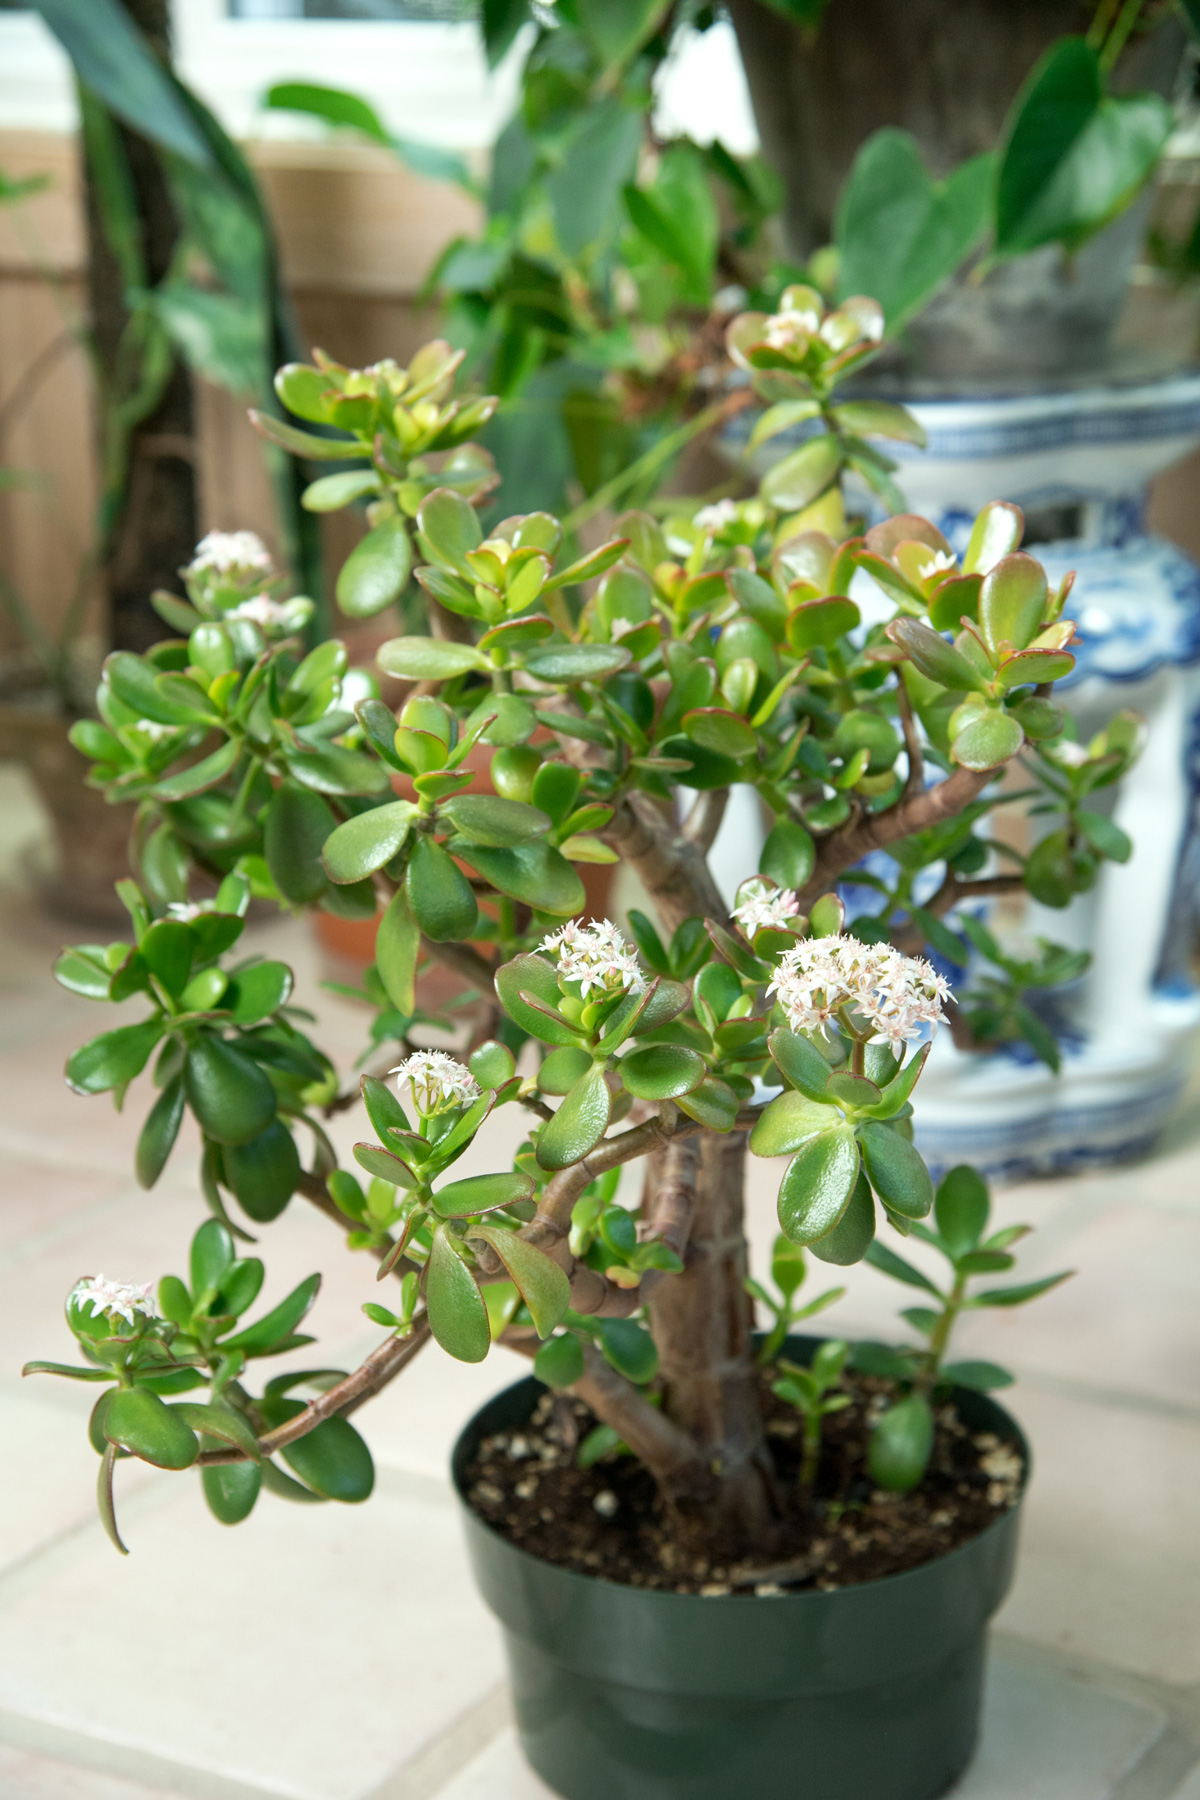 Are there other possible reasons for a jade plant losing its leaves